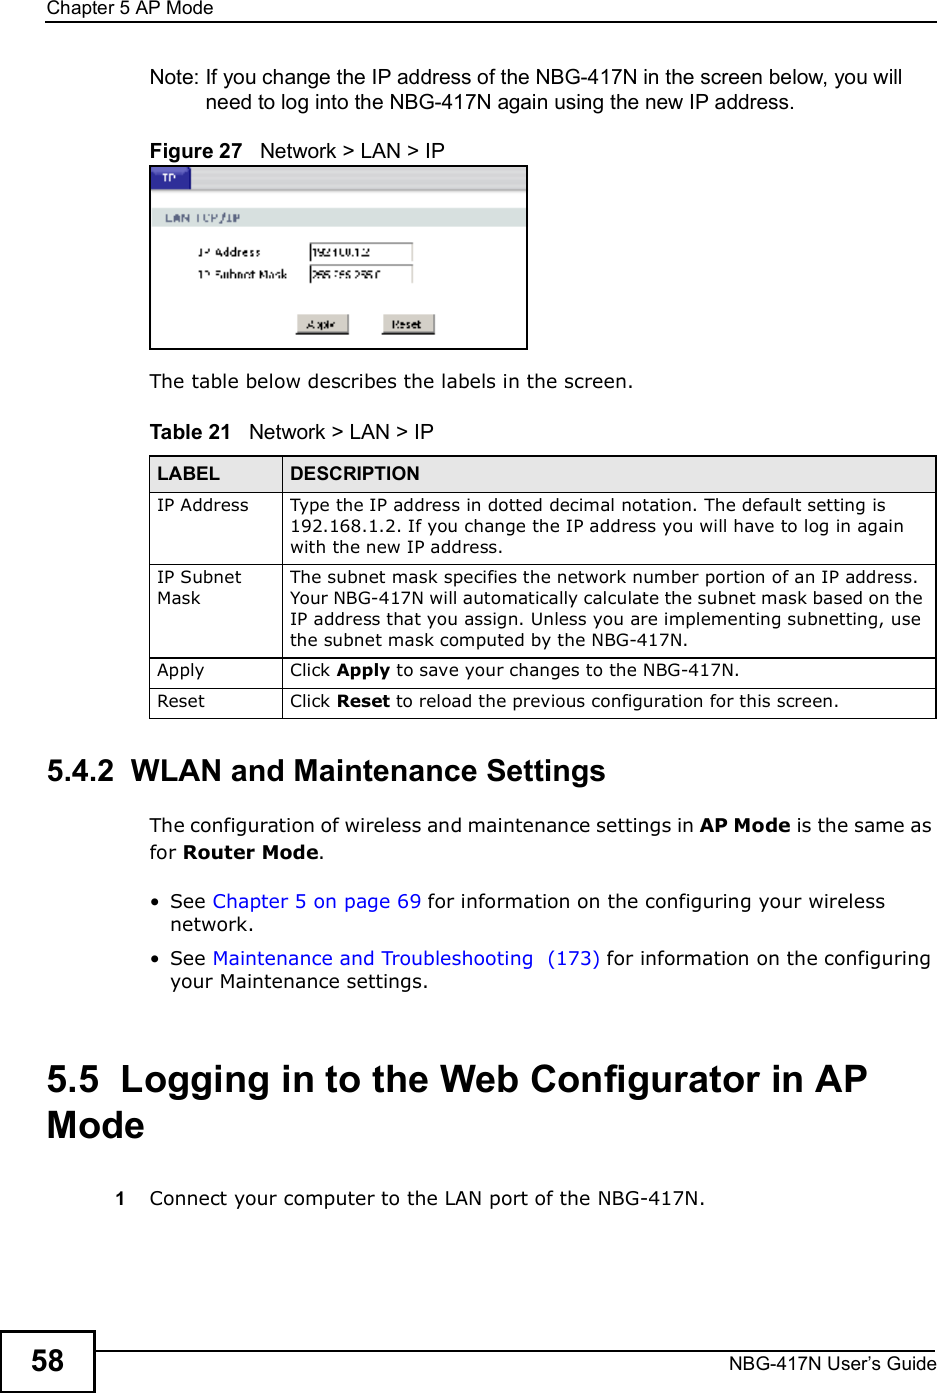 Chapter 5AP ModeNBG-417N User s Guide58Note: If you change the IP address of the NBG-417N in the screen below, you will need to log into the NBG-417N again using the new IP address.Figure 27   Network &gt; LAN &gt; IP   The table below describes the labels in the screen.Table 21   Network &gt; LAN &gt; IP     5.4.2  WLAN and Maintenance SettingsThe configuration of wireless and maintenance settings in AP Mode is the same as for Router Mode. See Chapter 5 on page 69 for information on the configuring your wireless network. See Maintenance and Troubleshooting  (173) for information on the configuring your Maintenance settings. 5.5  Logging in to the Web Configurator in AP Mode1Connect your computer to the LAN port of the NBG-417N. LABEL DESCRIPTIONIP Address Type the IP address in dotted decimal notation. The default setting is 192.168.1.2. If you change the IP address you will have to log in again with the new IP address.   IP Subnet MaskThe subnet mask specifies the network number portion of an IP address. Your NBG-417N will automatically calculate the subnet mask based on the IP address that you assign. Unless you are implementing subnetting, use the subnet mask computed by the NBG-417N.Apply Click Apply to save your changes to the NBG-417N.Reset Click Reset to reload the previous configuration for this screen.